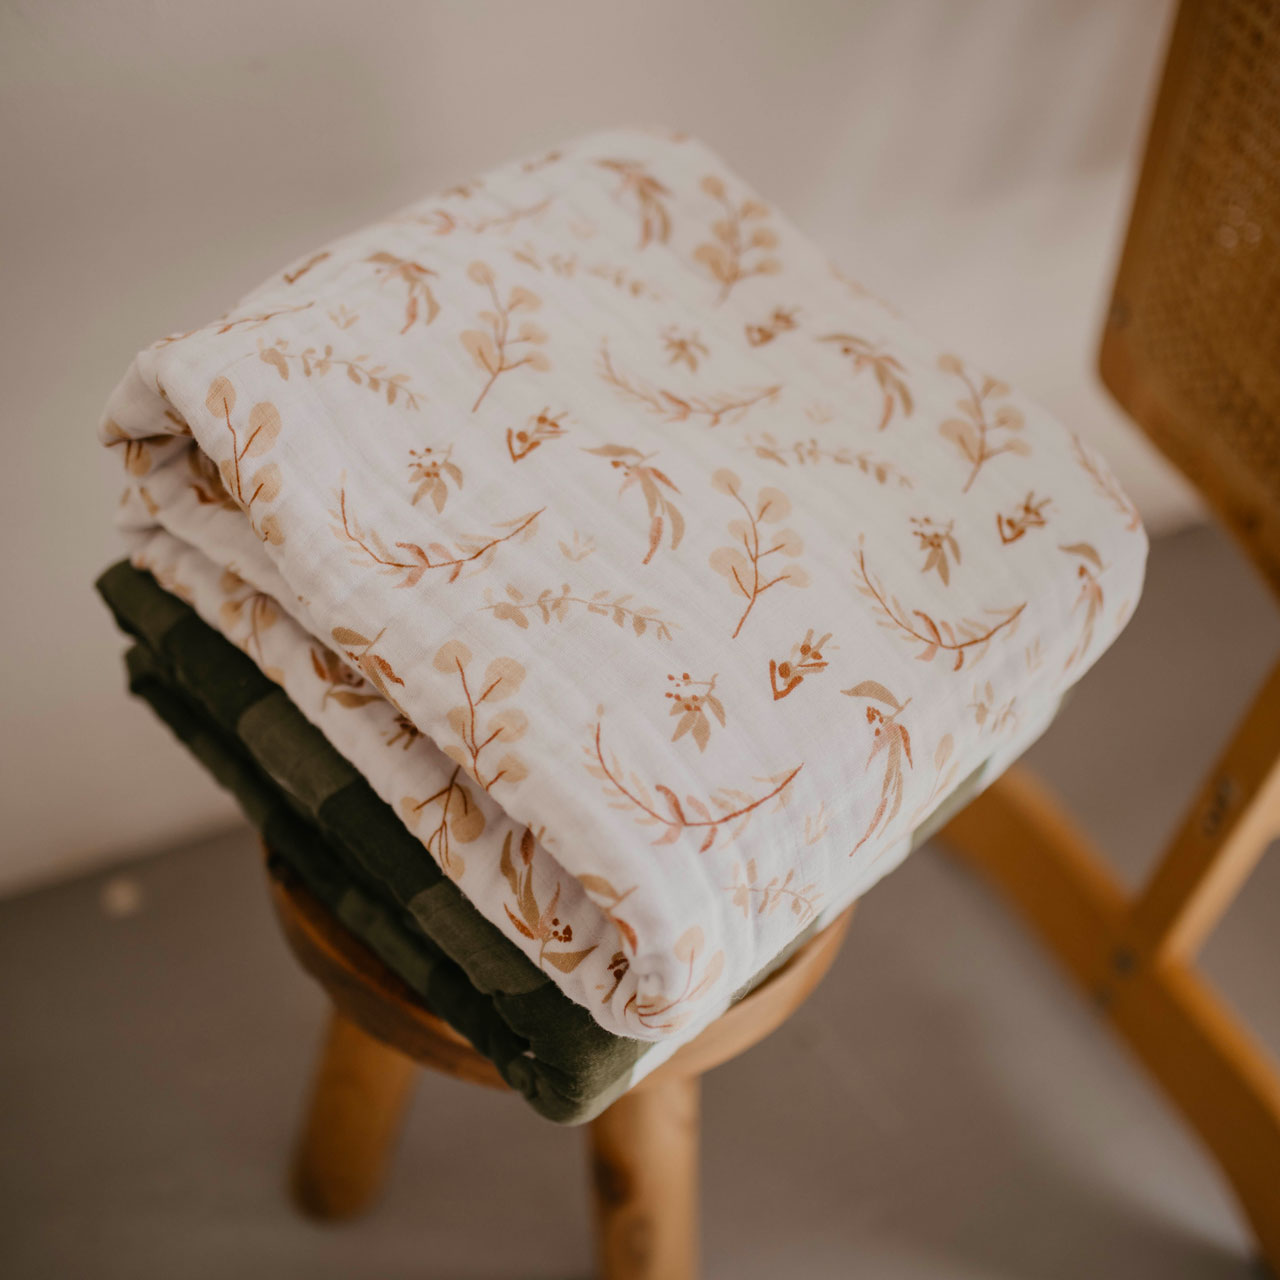 Prairie floral quilt stacked on stool